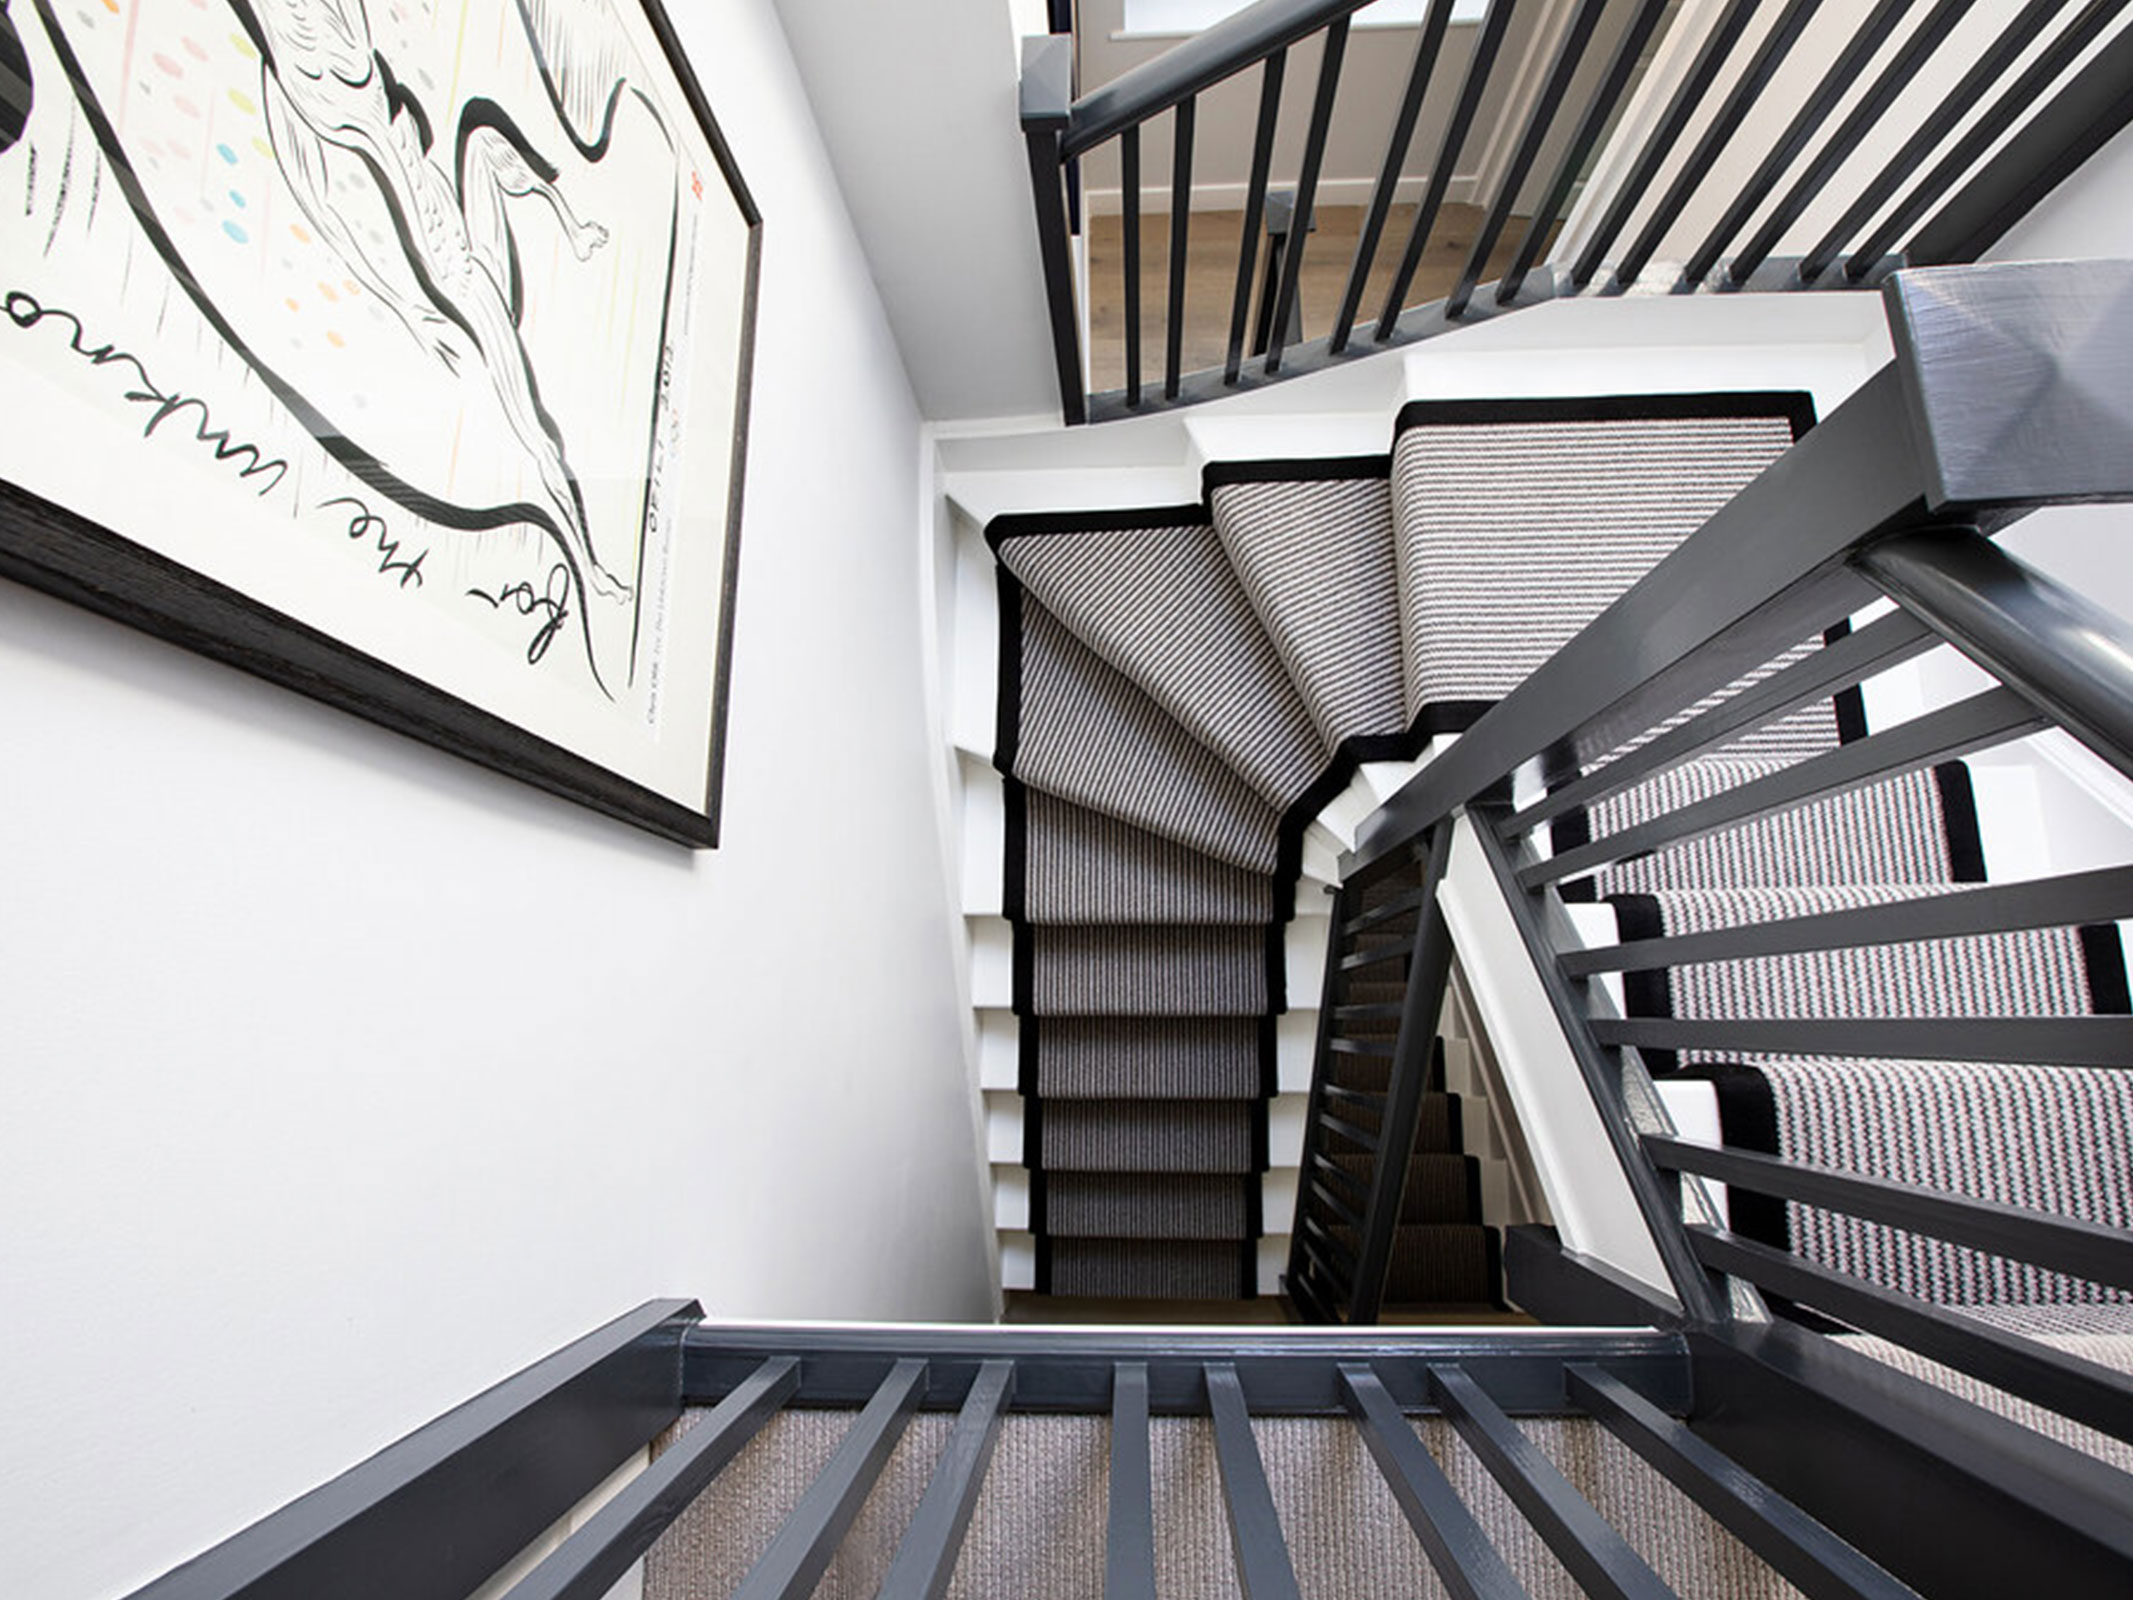 Refurbished and Decorated London House Stairway